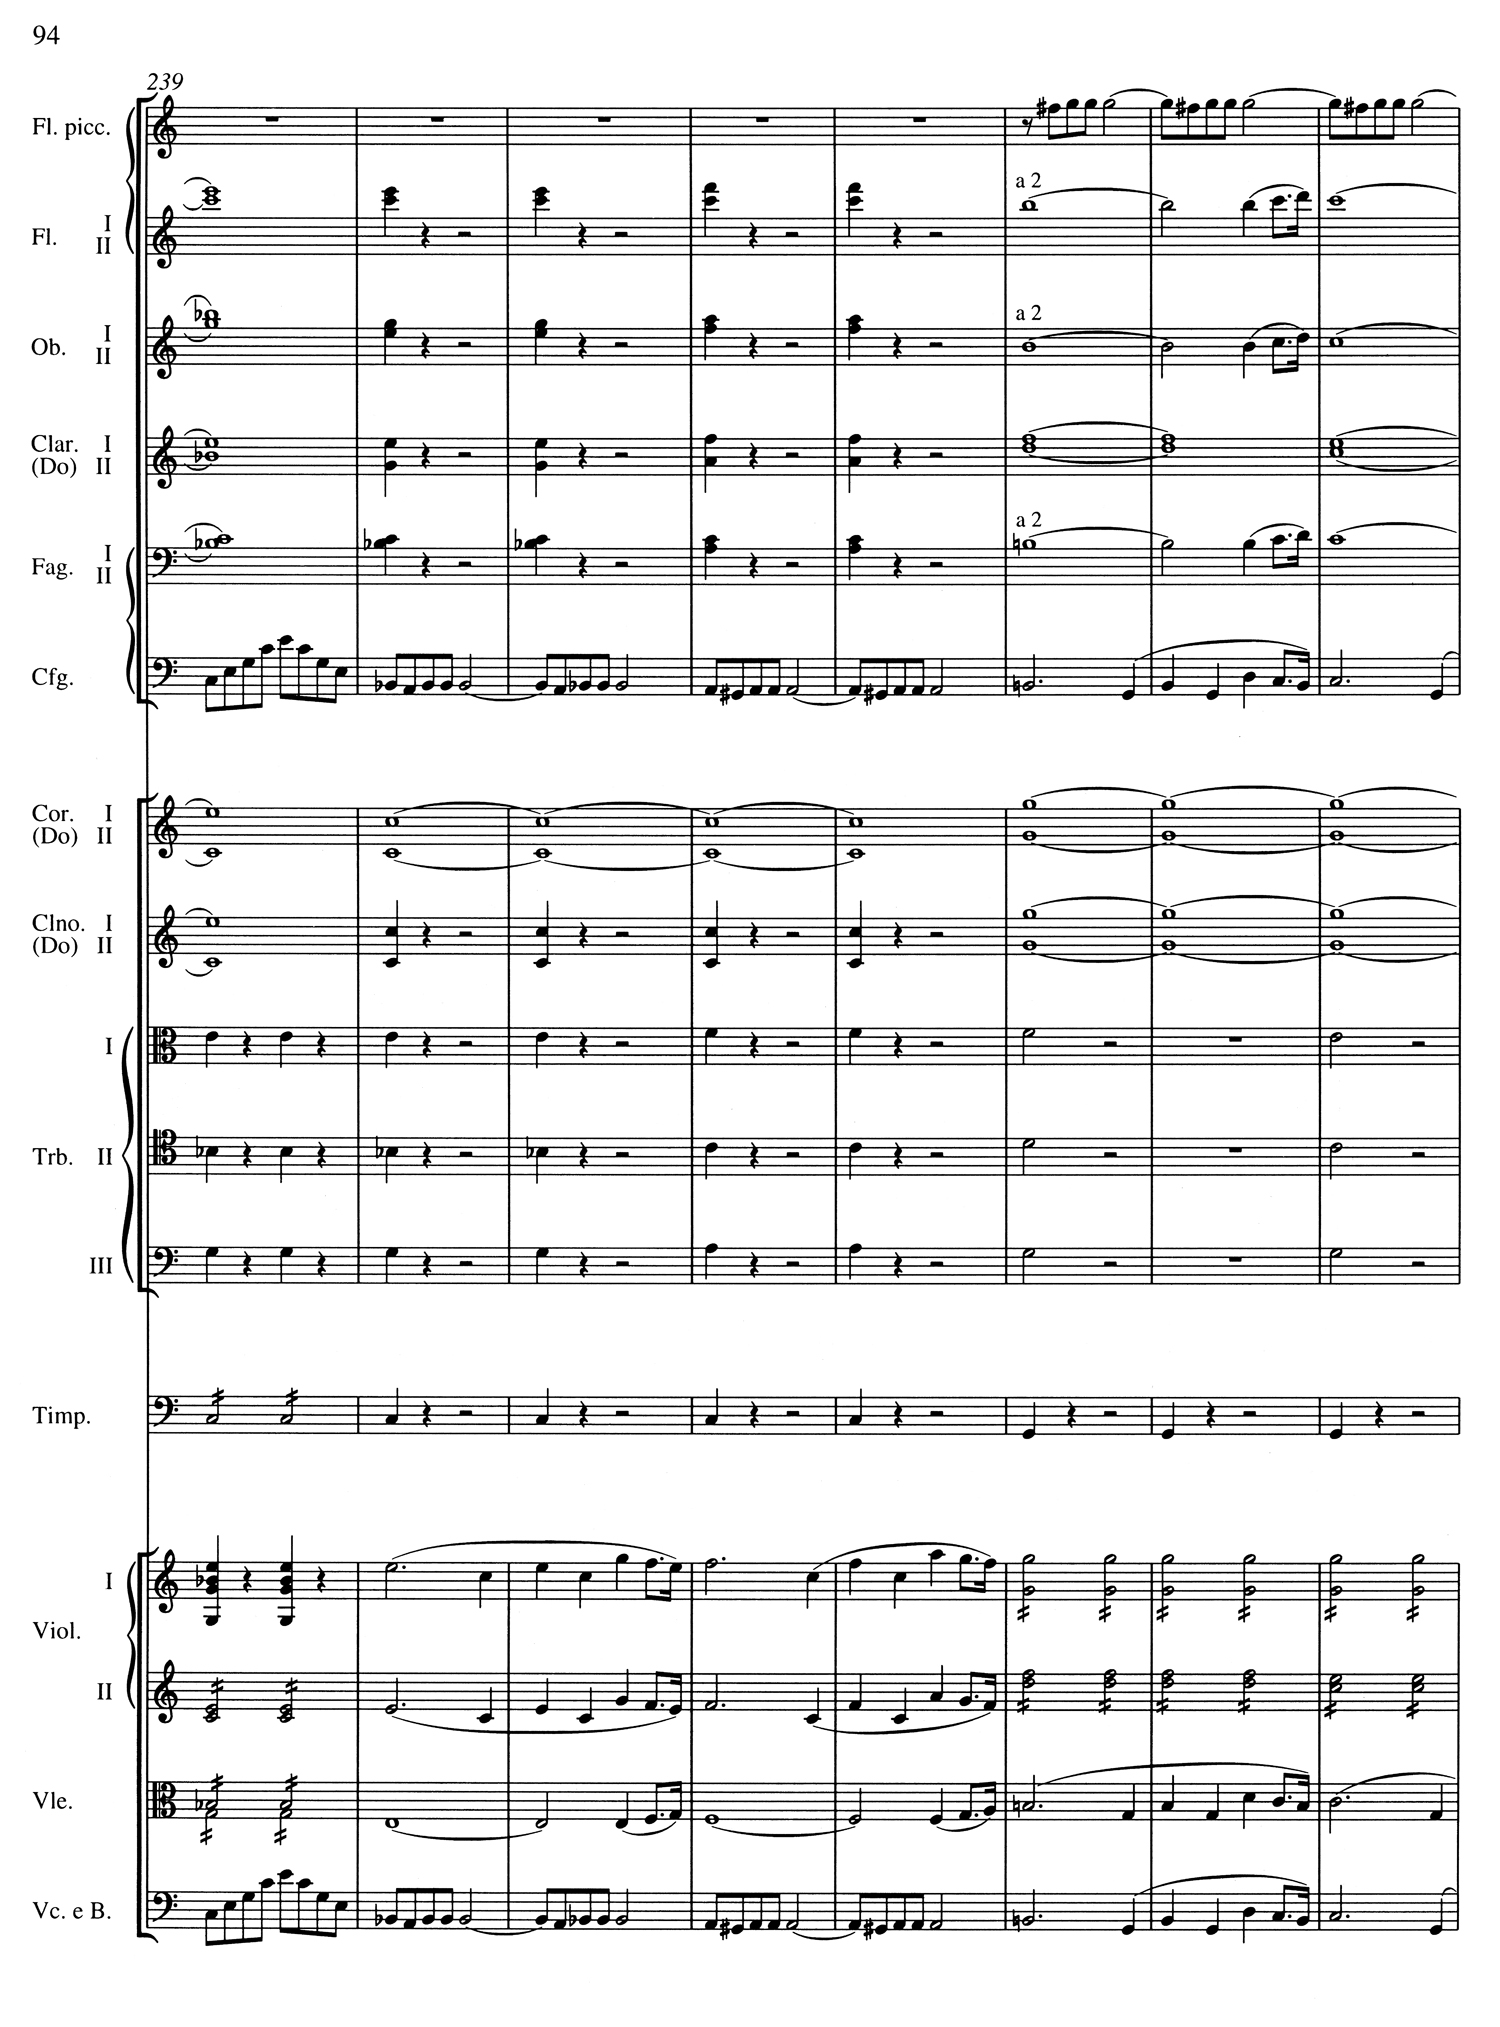 Beethoven 5 Score Page 6.jpg